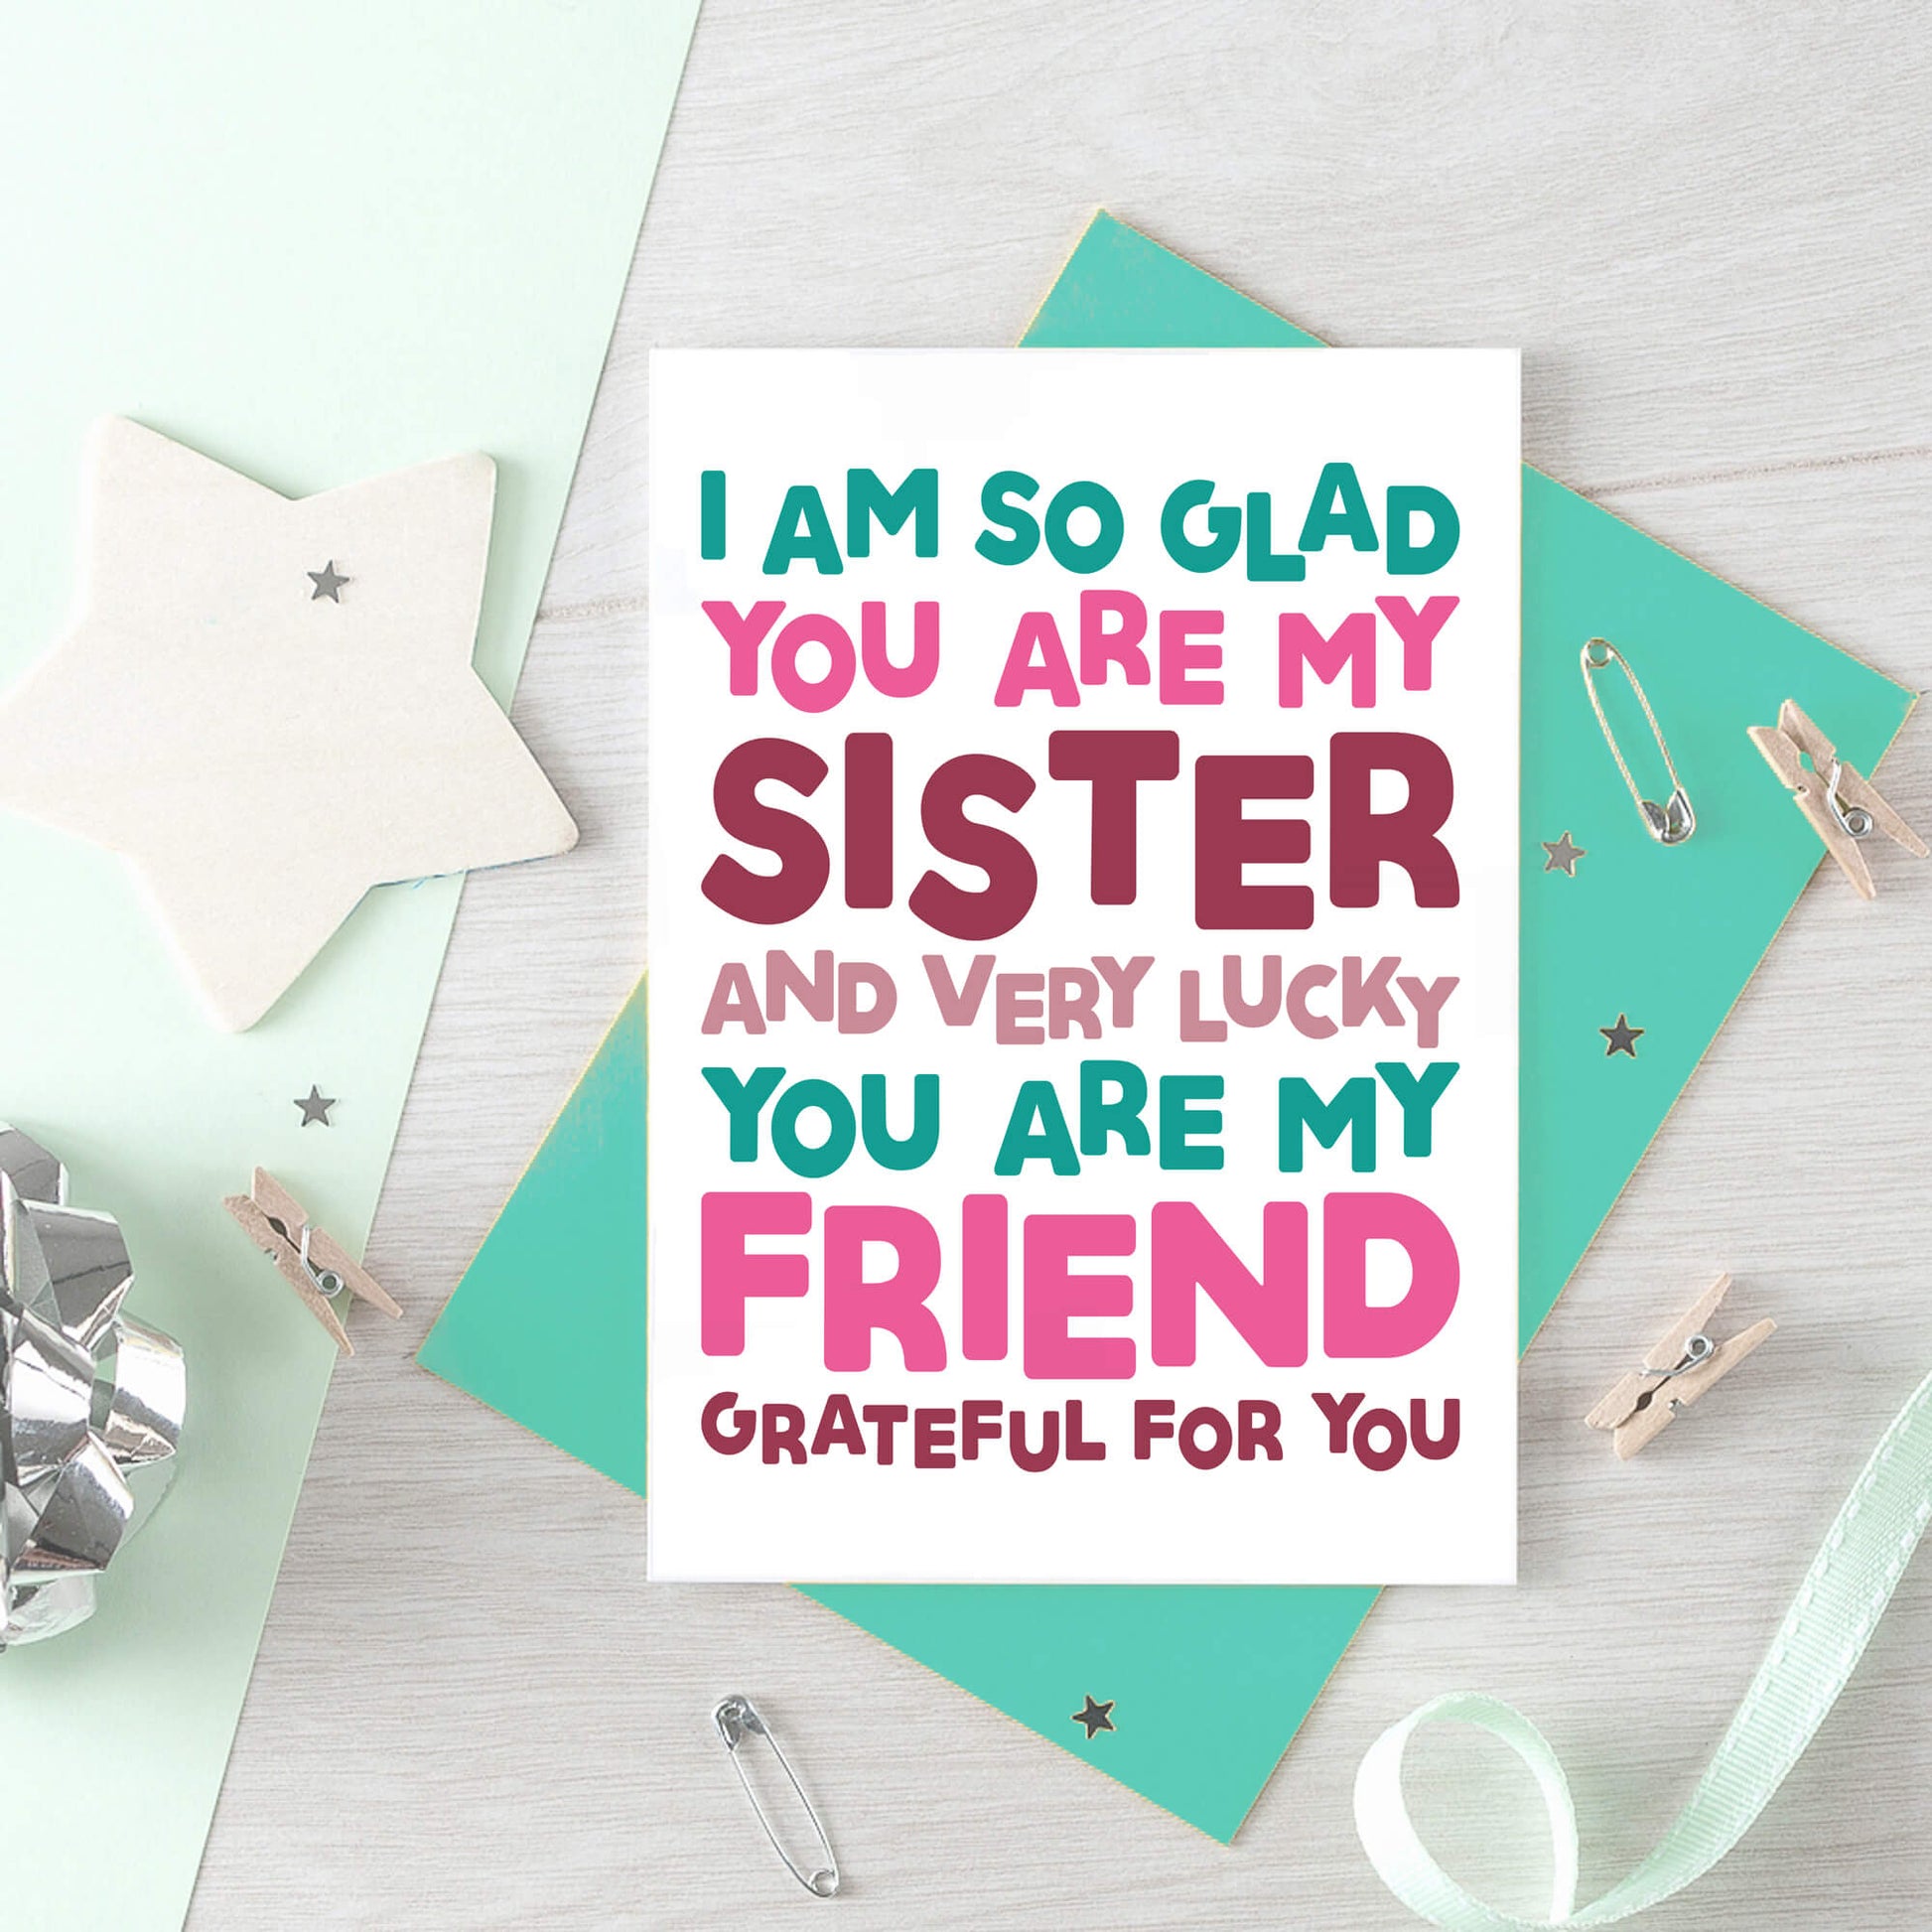 Sister Card by SixElevenCreations. Reads I am so glad you are my sister and very lucky you are my friend. Grateful for you. Product Code SE0707A6